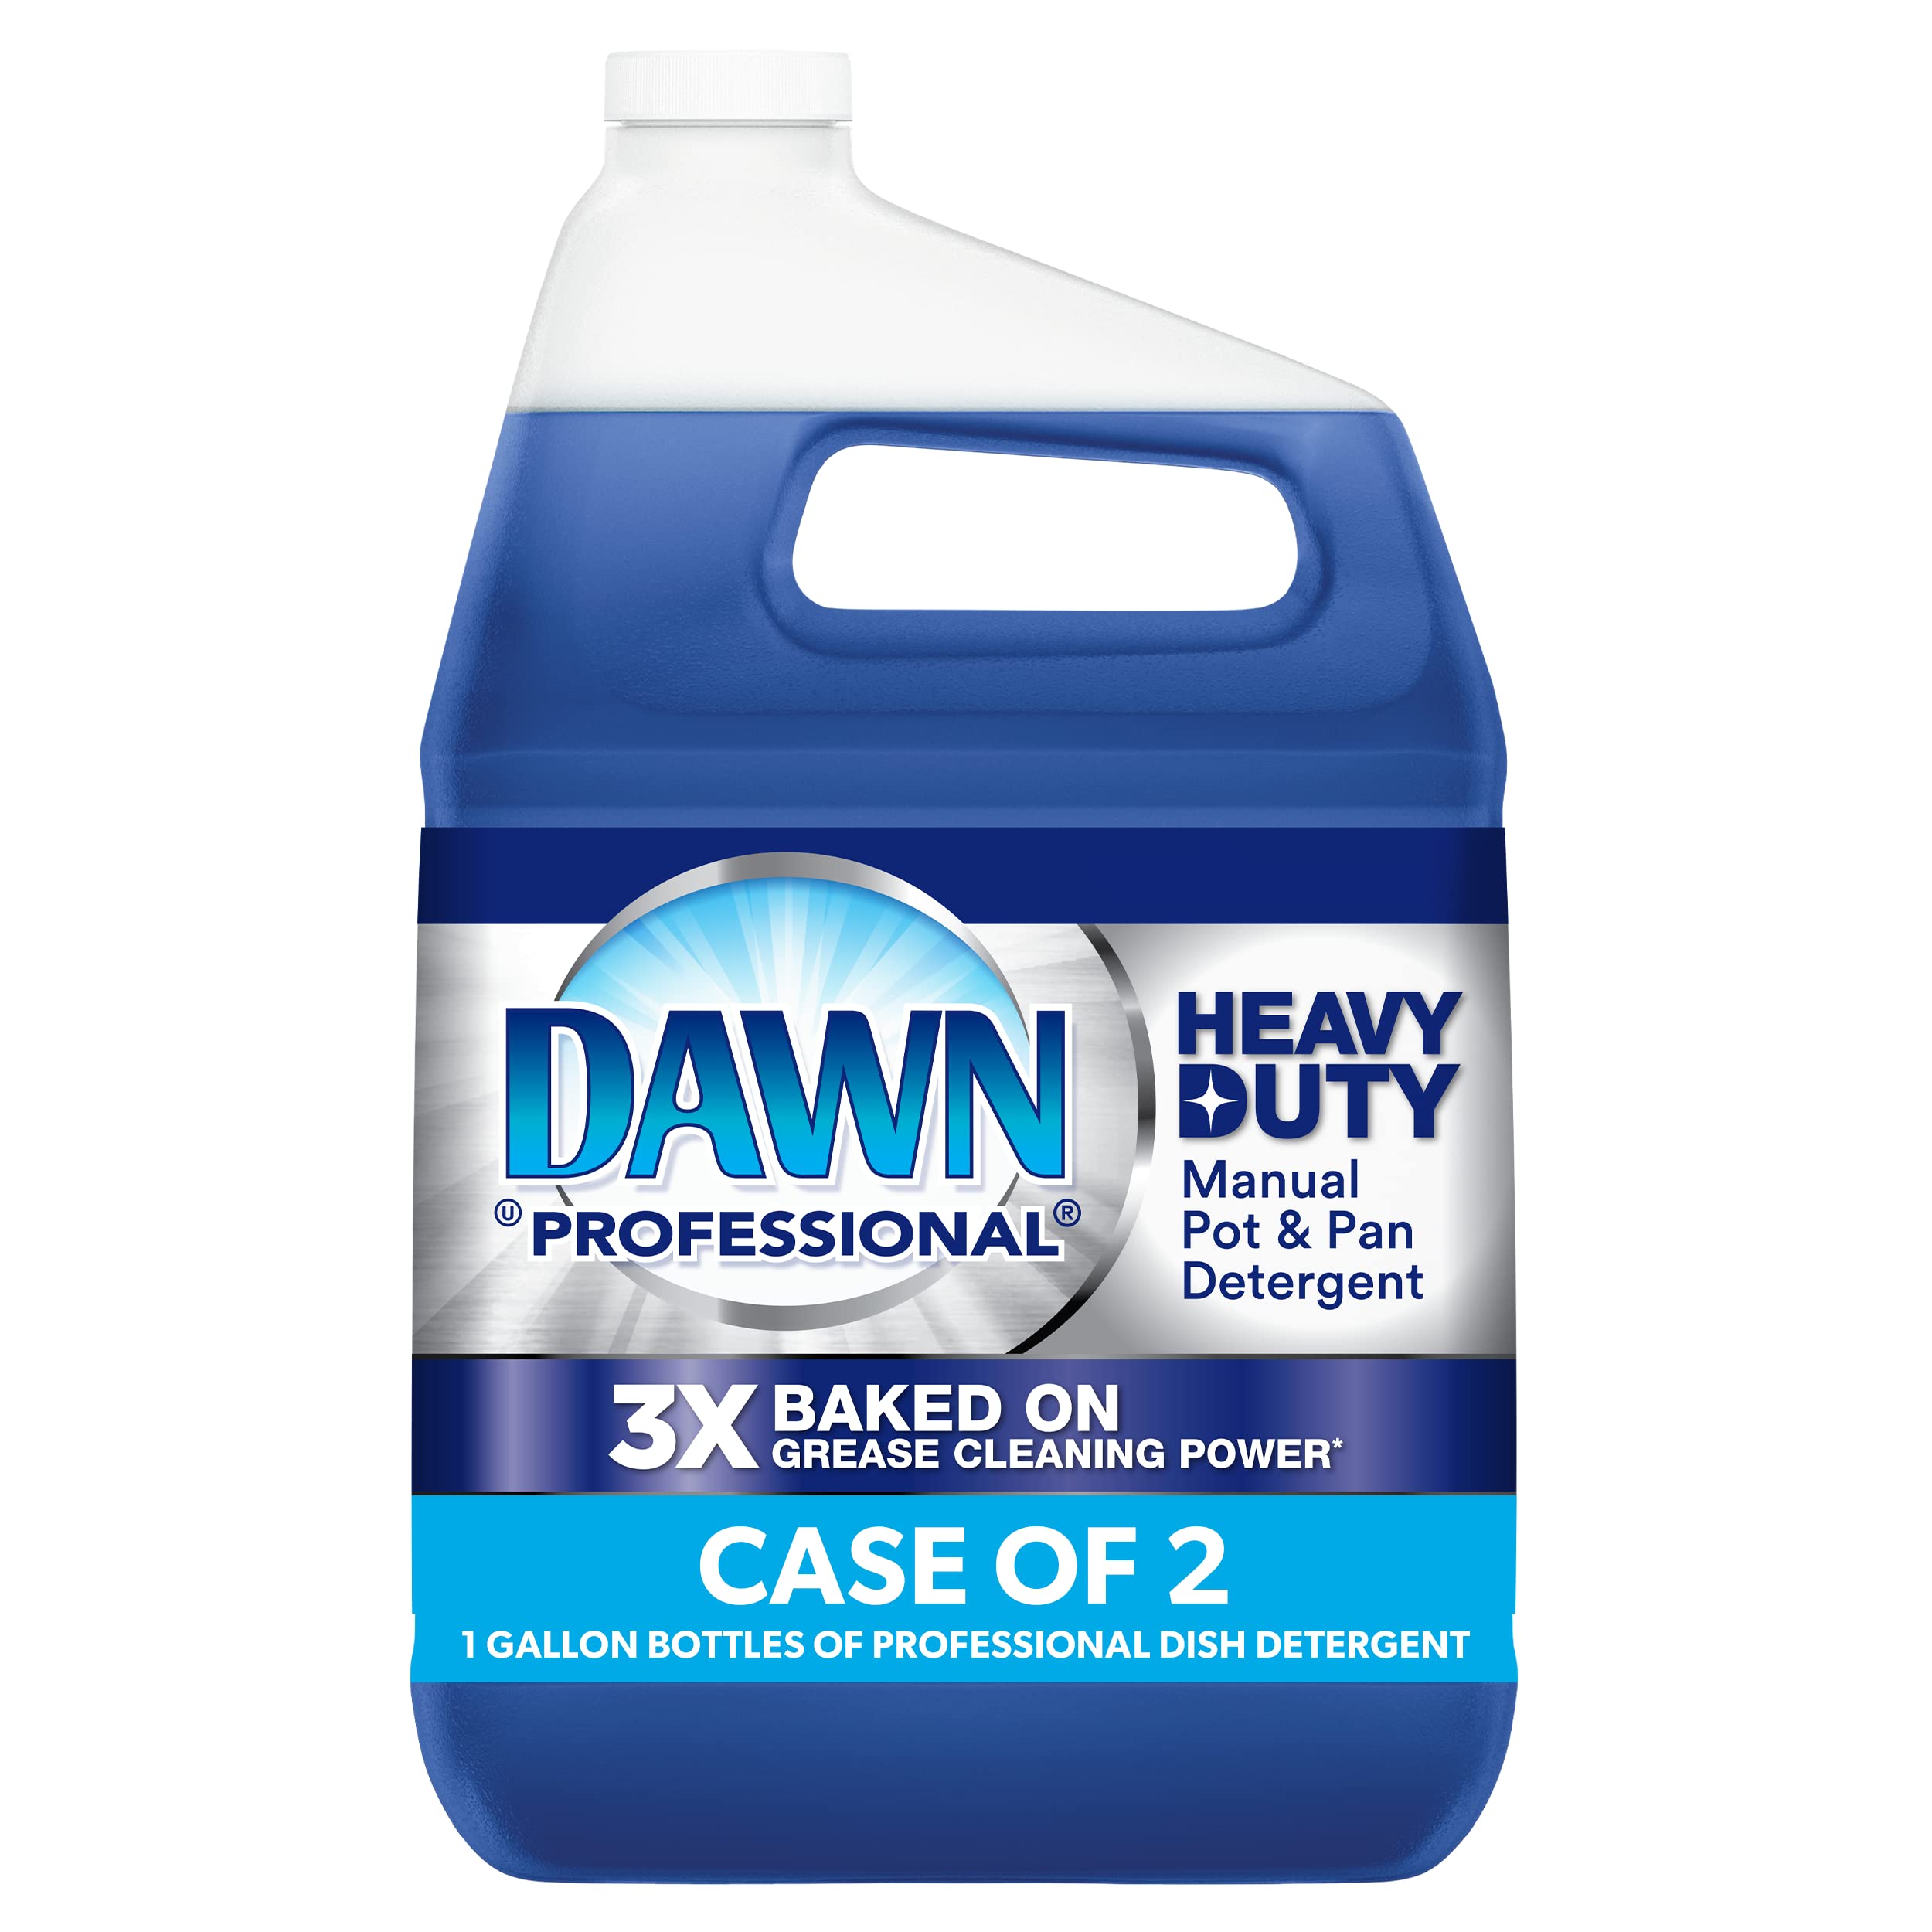 Dawn Professional Heavy Duty Manual Pot and Pan Dish Soap Detergent, 1 Gallon (Case of 2)